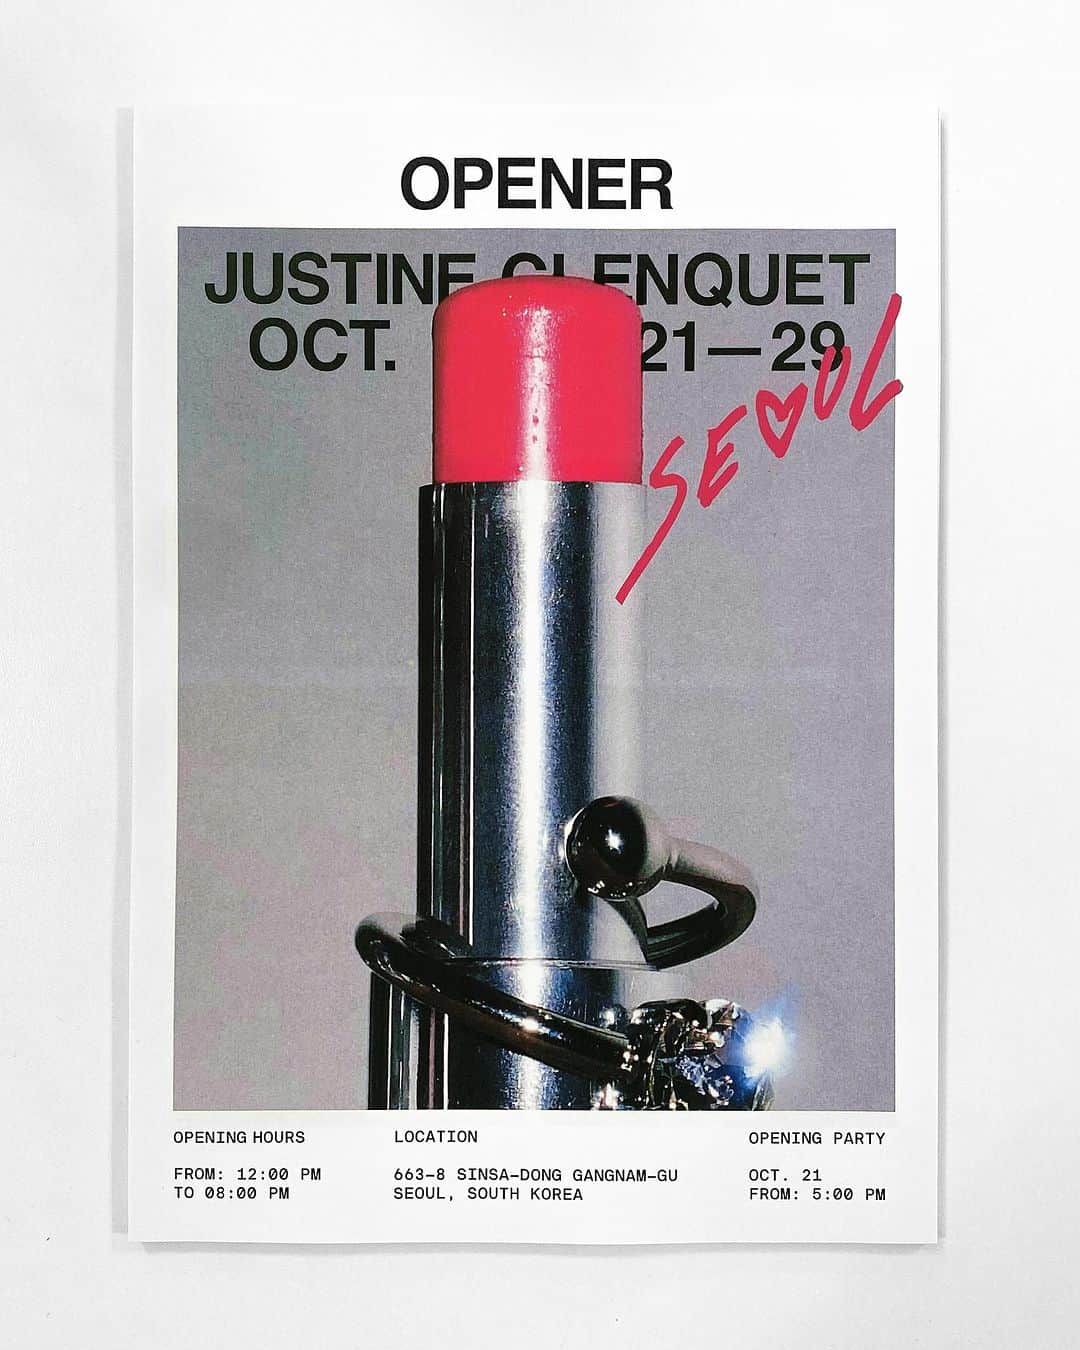 Justine Clenquetのインスタグラム：「We're so excited to invite you to our first pop-up store in Seoul with @opener_official 🇰🇷 Come to discover exclusive pieces at 663-8 Sinsa-dong, Gangnam-gu, from October 21 to 29. Join us at the opening party on October 21! Can't wait to meet you there💕 #justineclenquet」